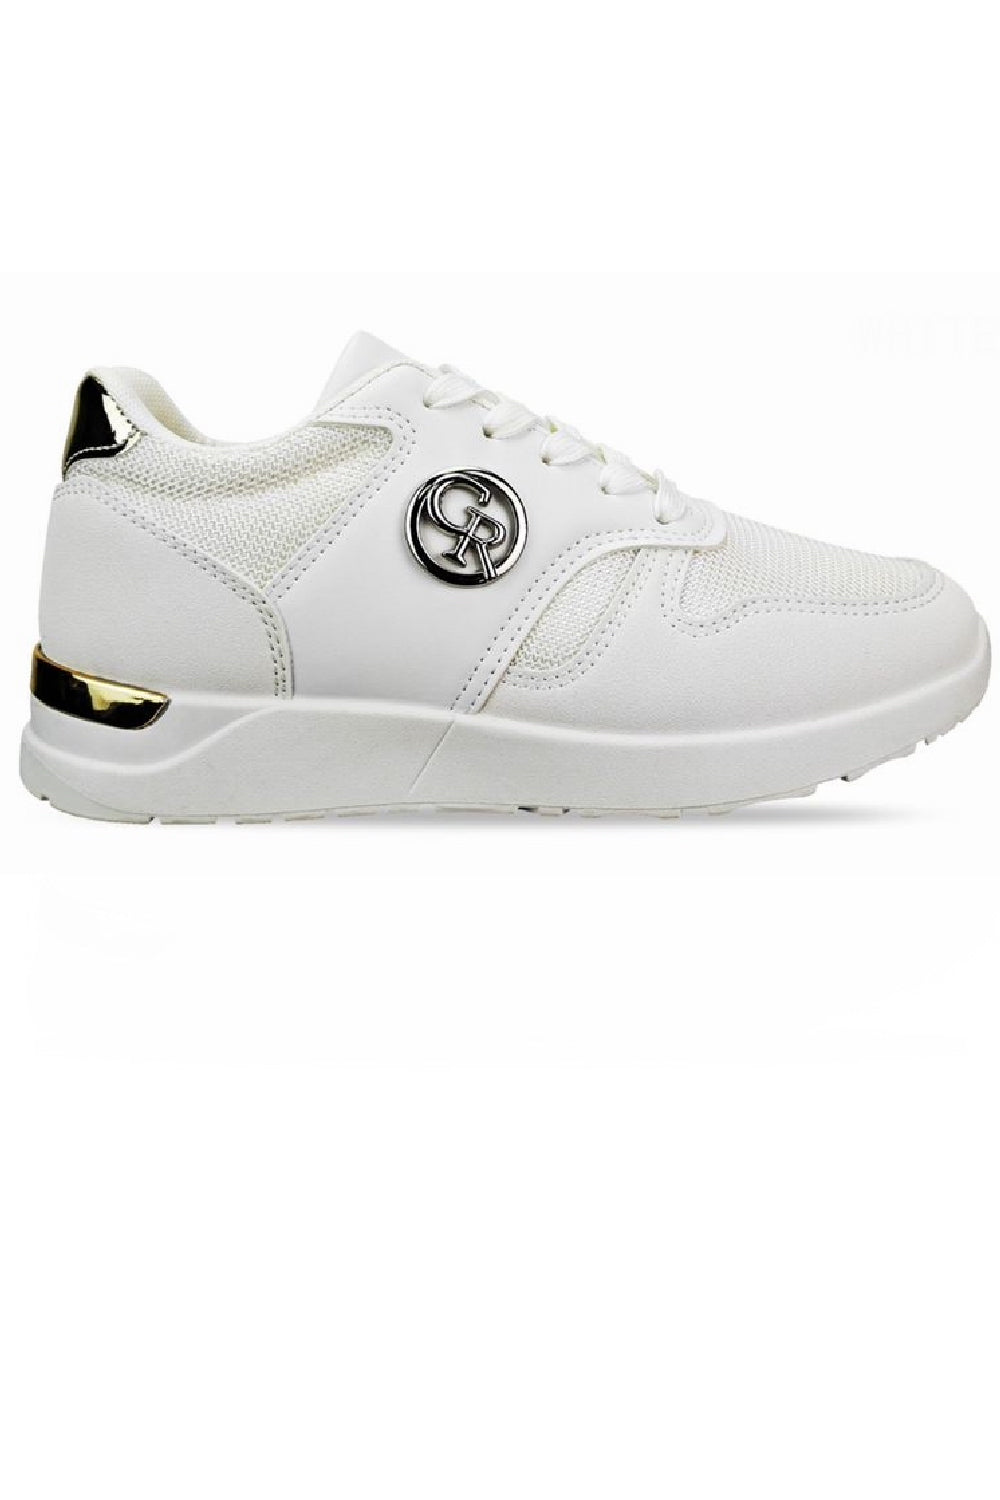 WHITE LACE UP TRAINERS WITH GOLD HEEL CLIP